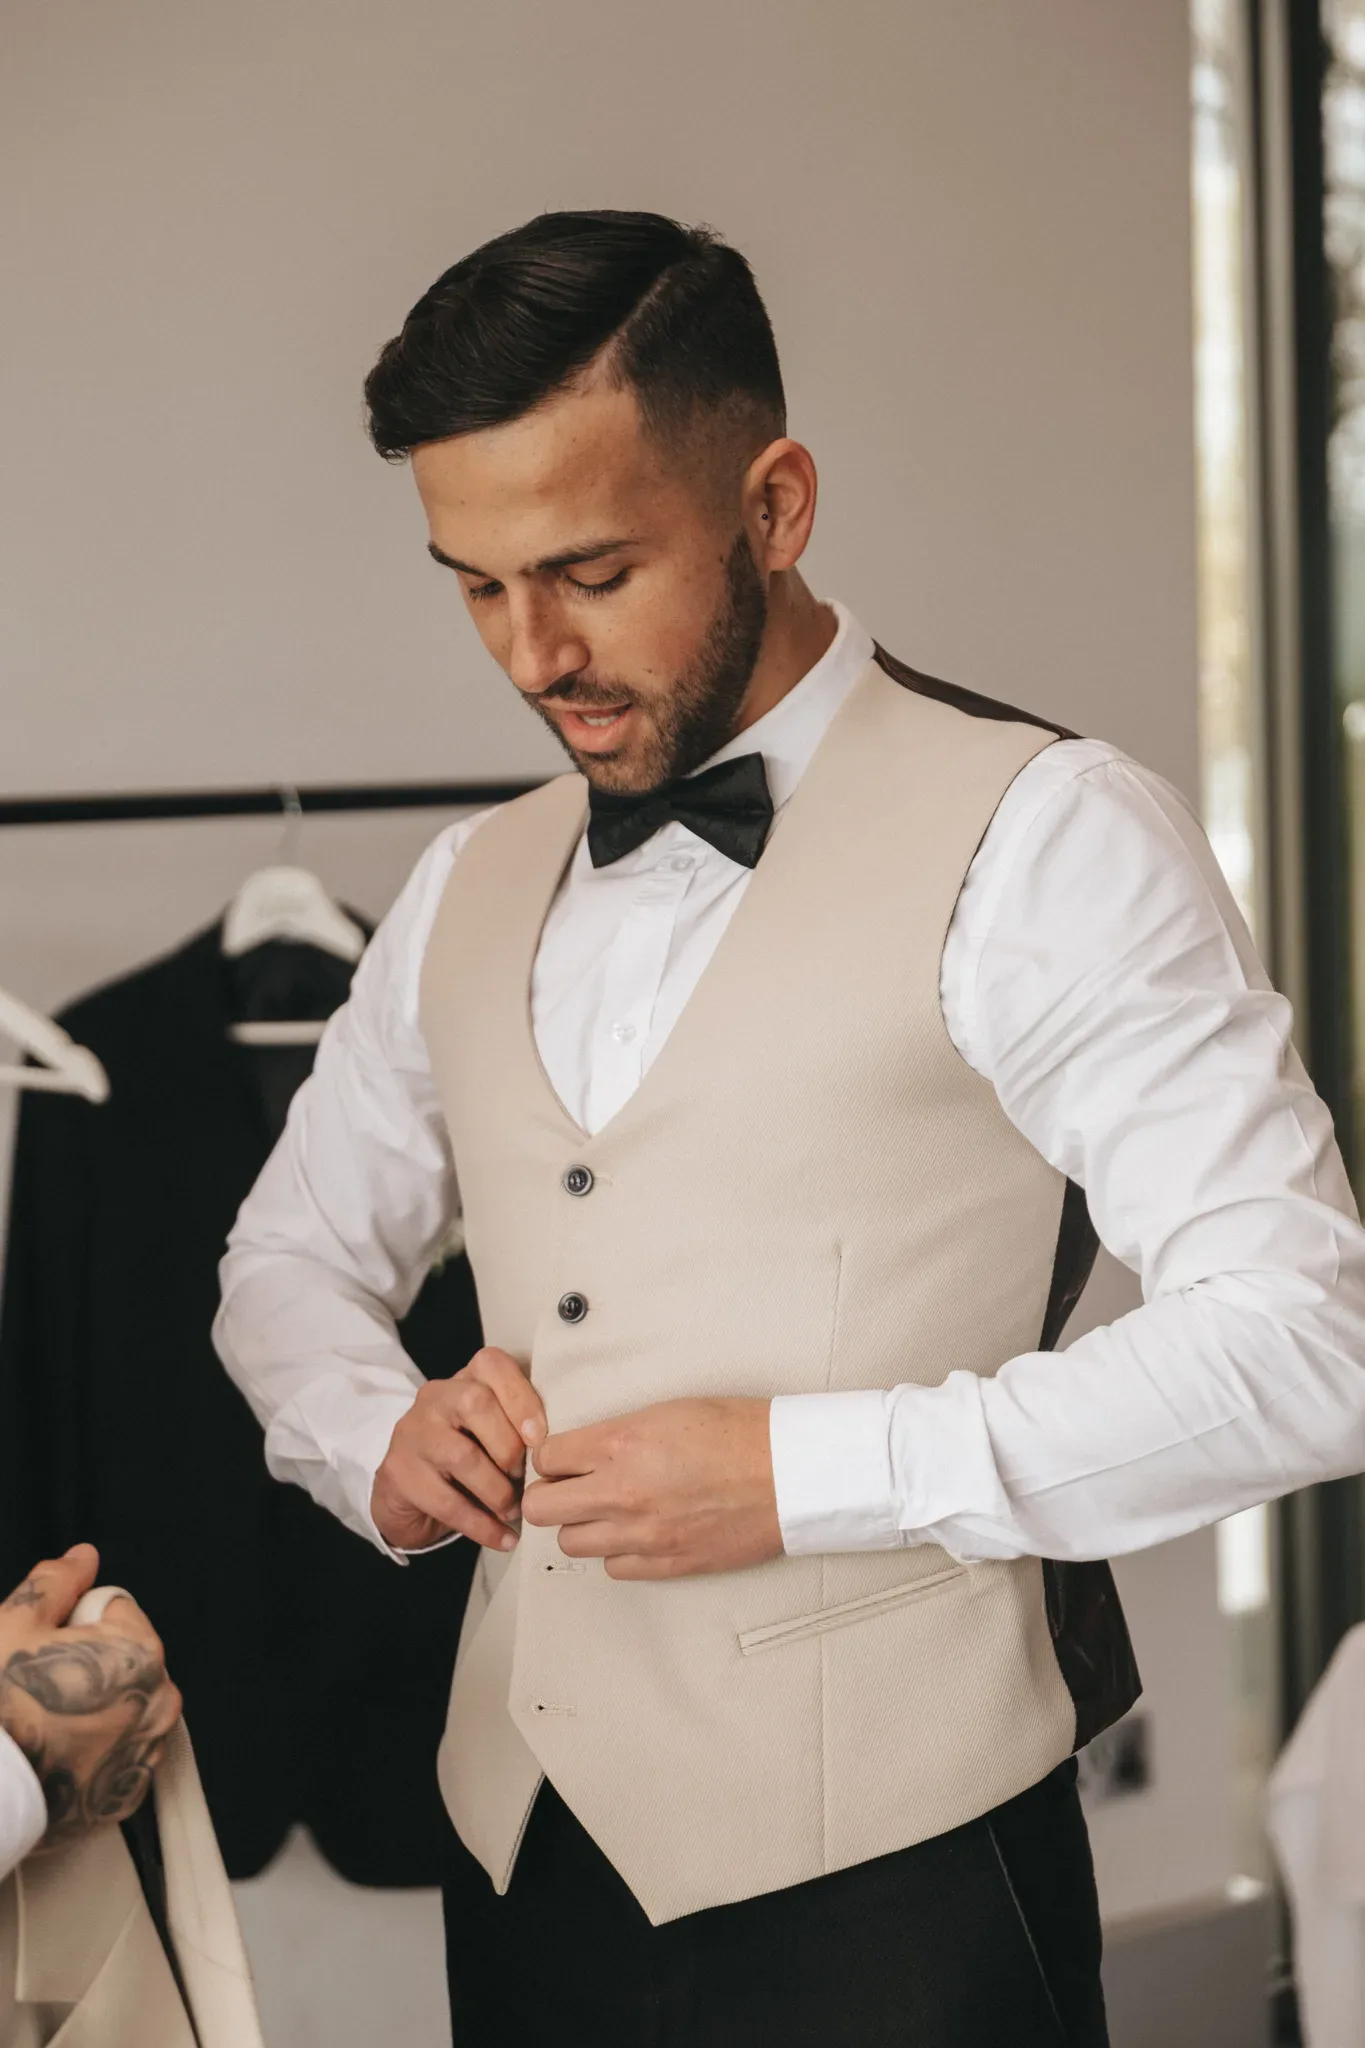 A groom in a white dress shirt and beige vest buttons his vest, preparing for his wedding. he has short, styled hair and a well-groomed beard, and is focused on his task.